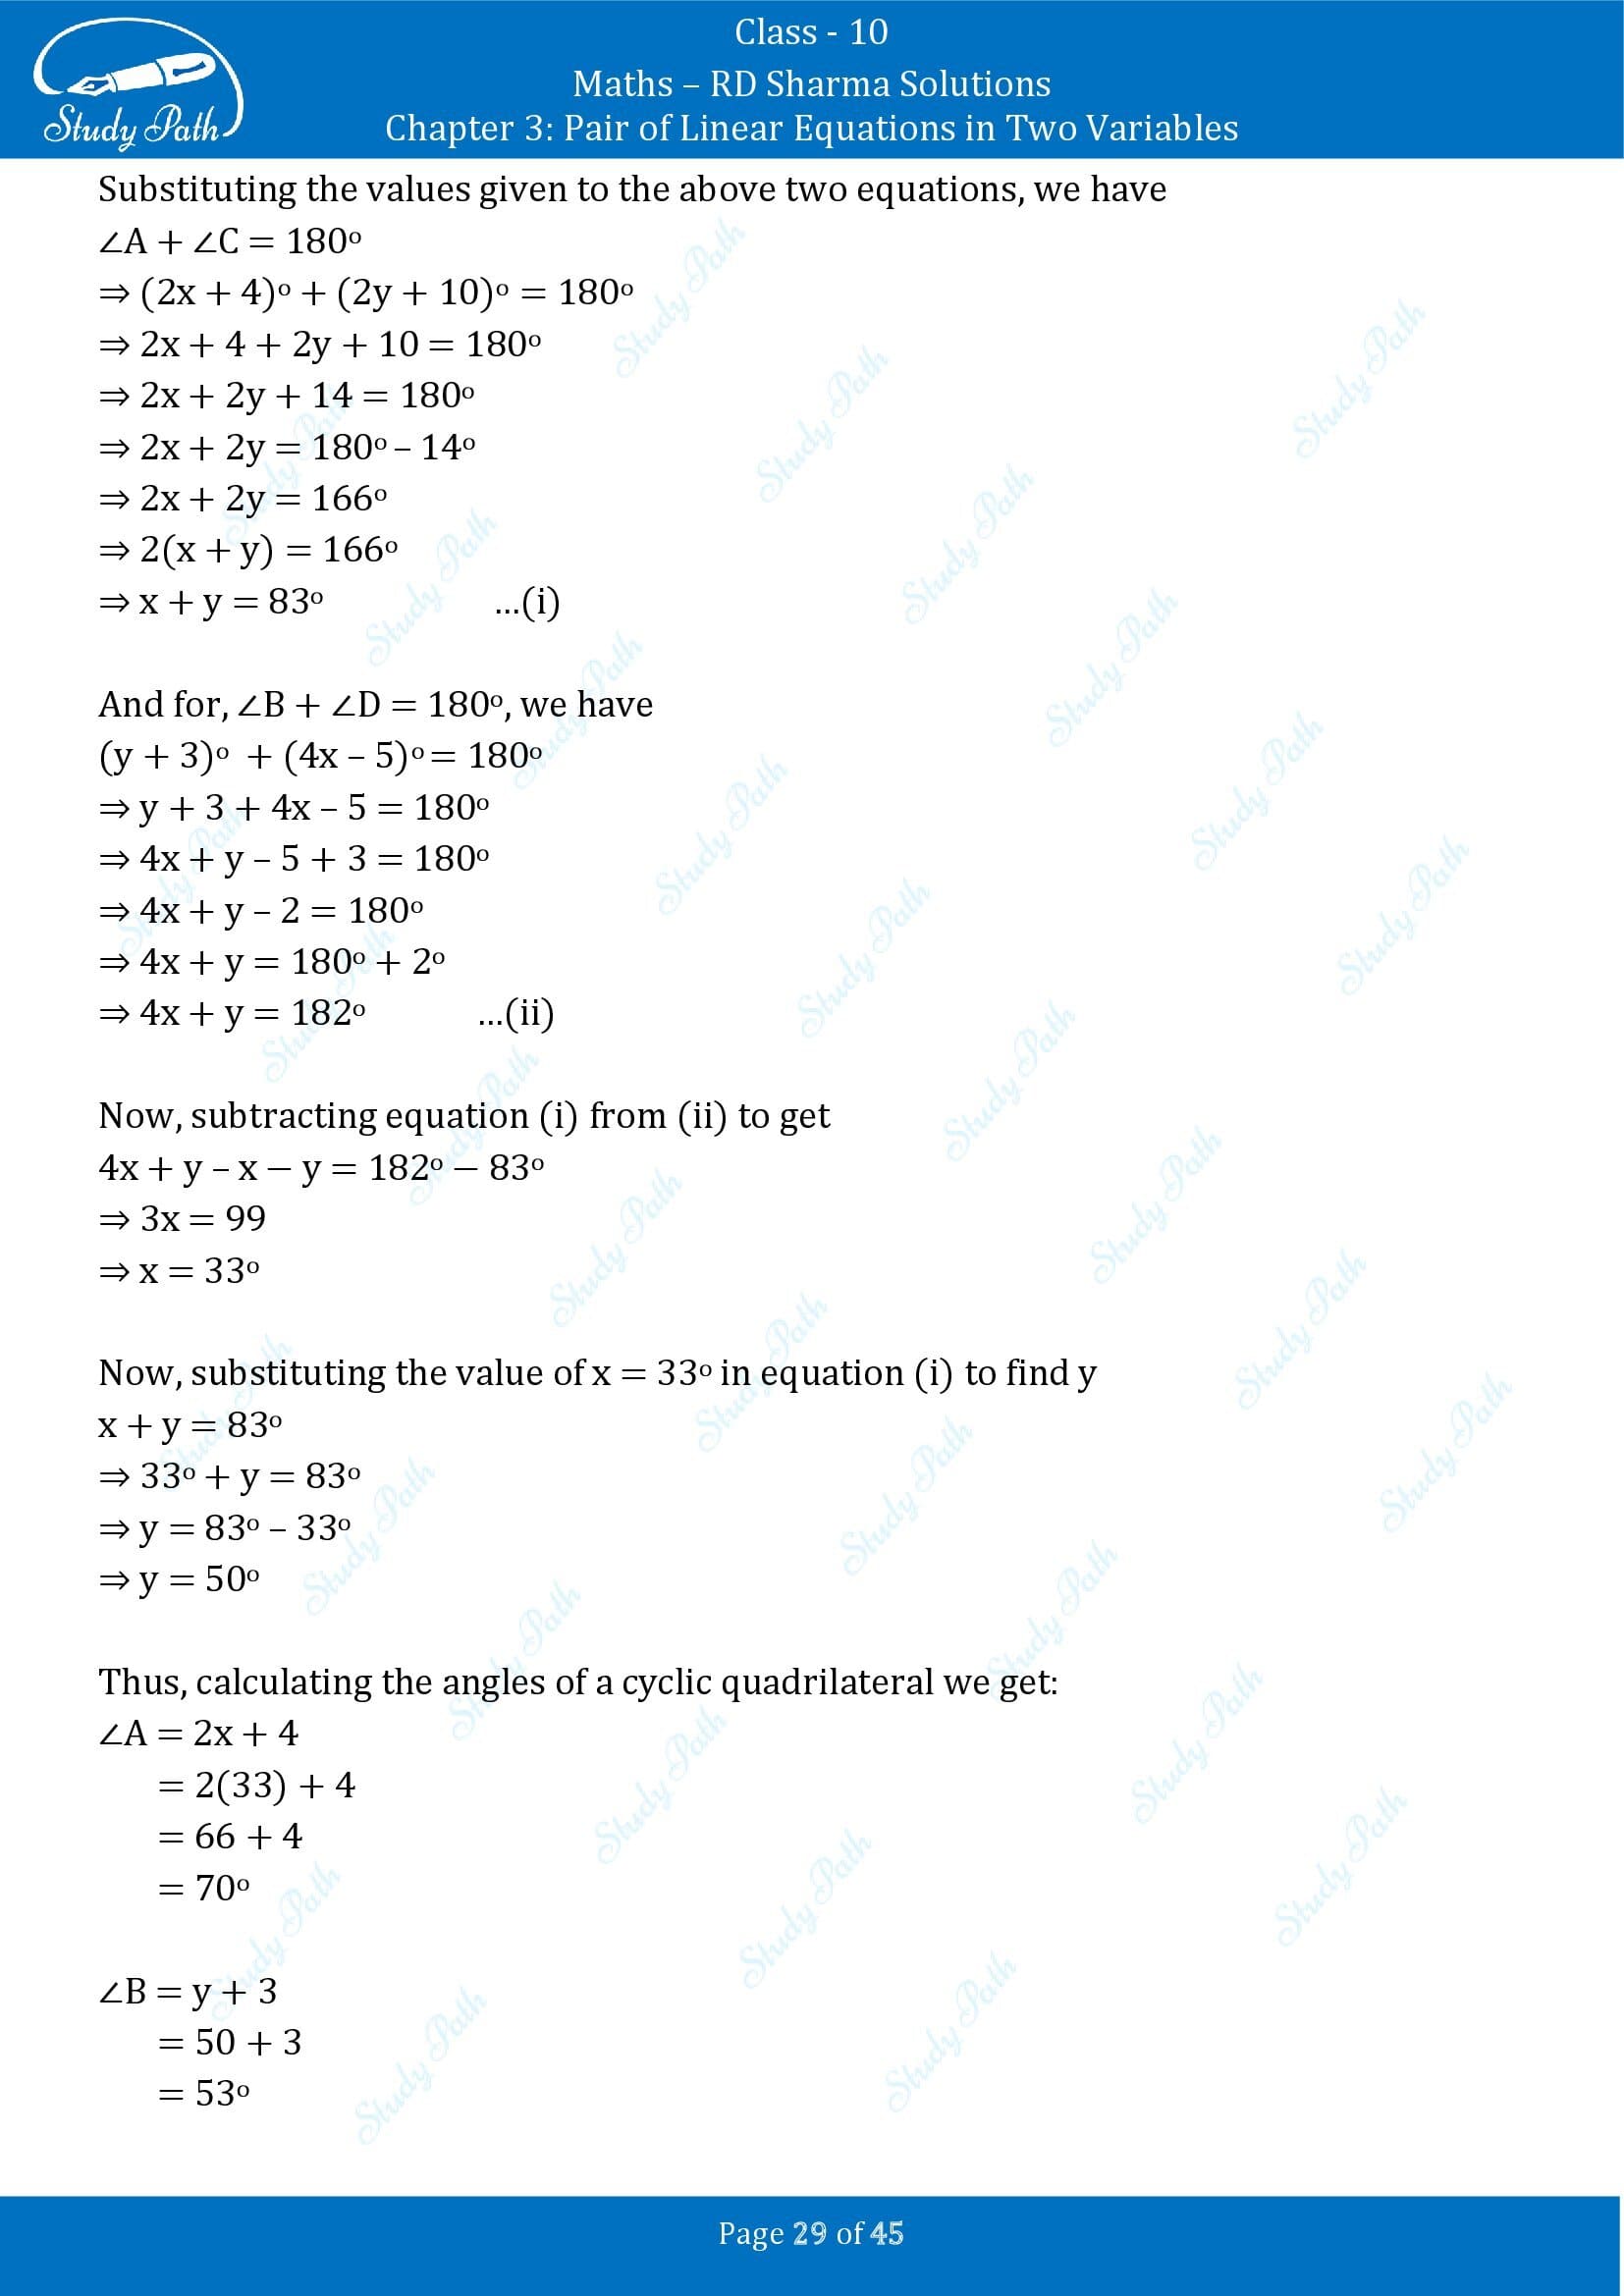 RD Sharma Solutions Class 10 Chapter 3 Pair of Linear Equations in Two Variables Exercise 3.11 00029